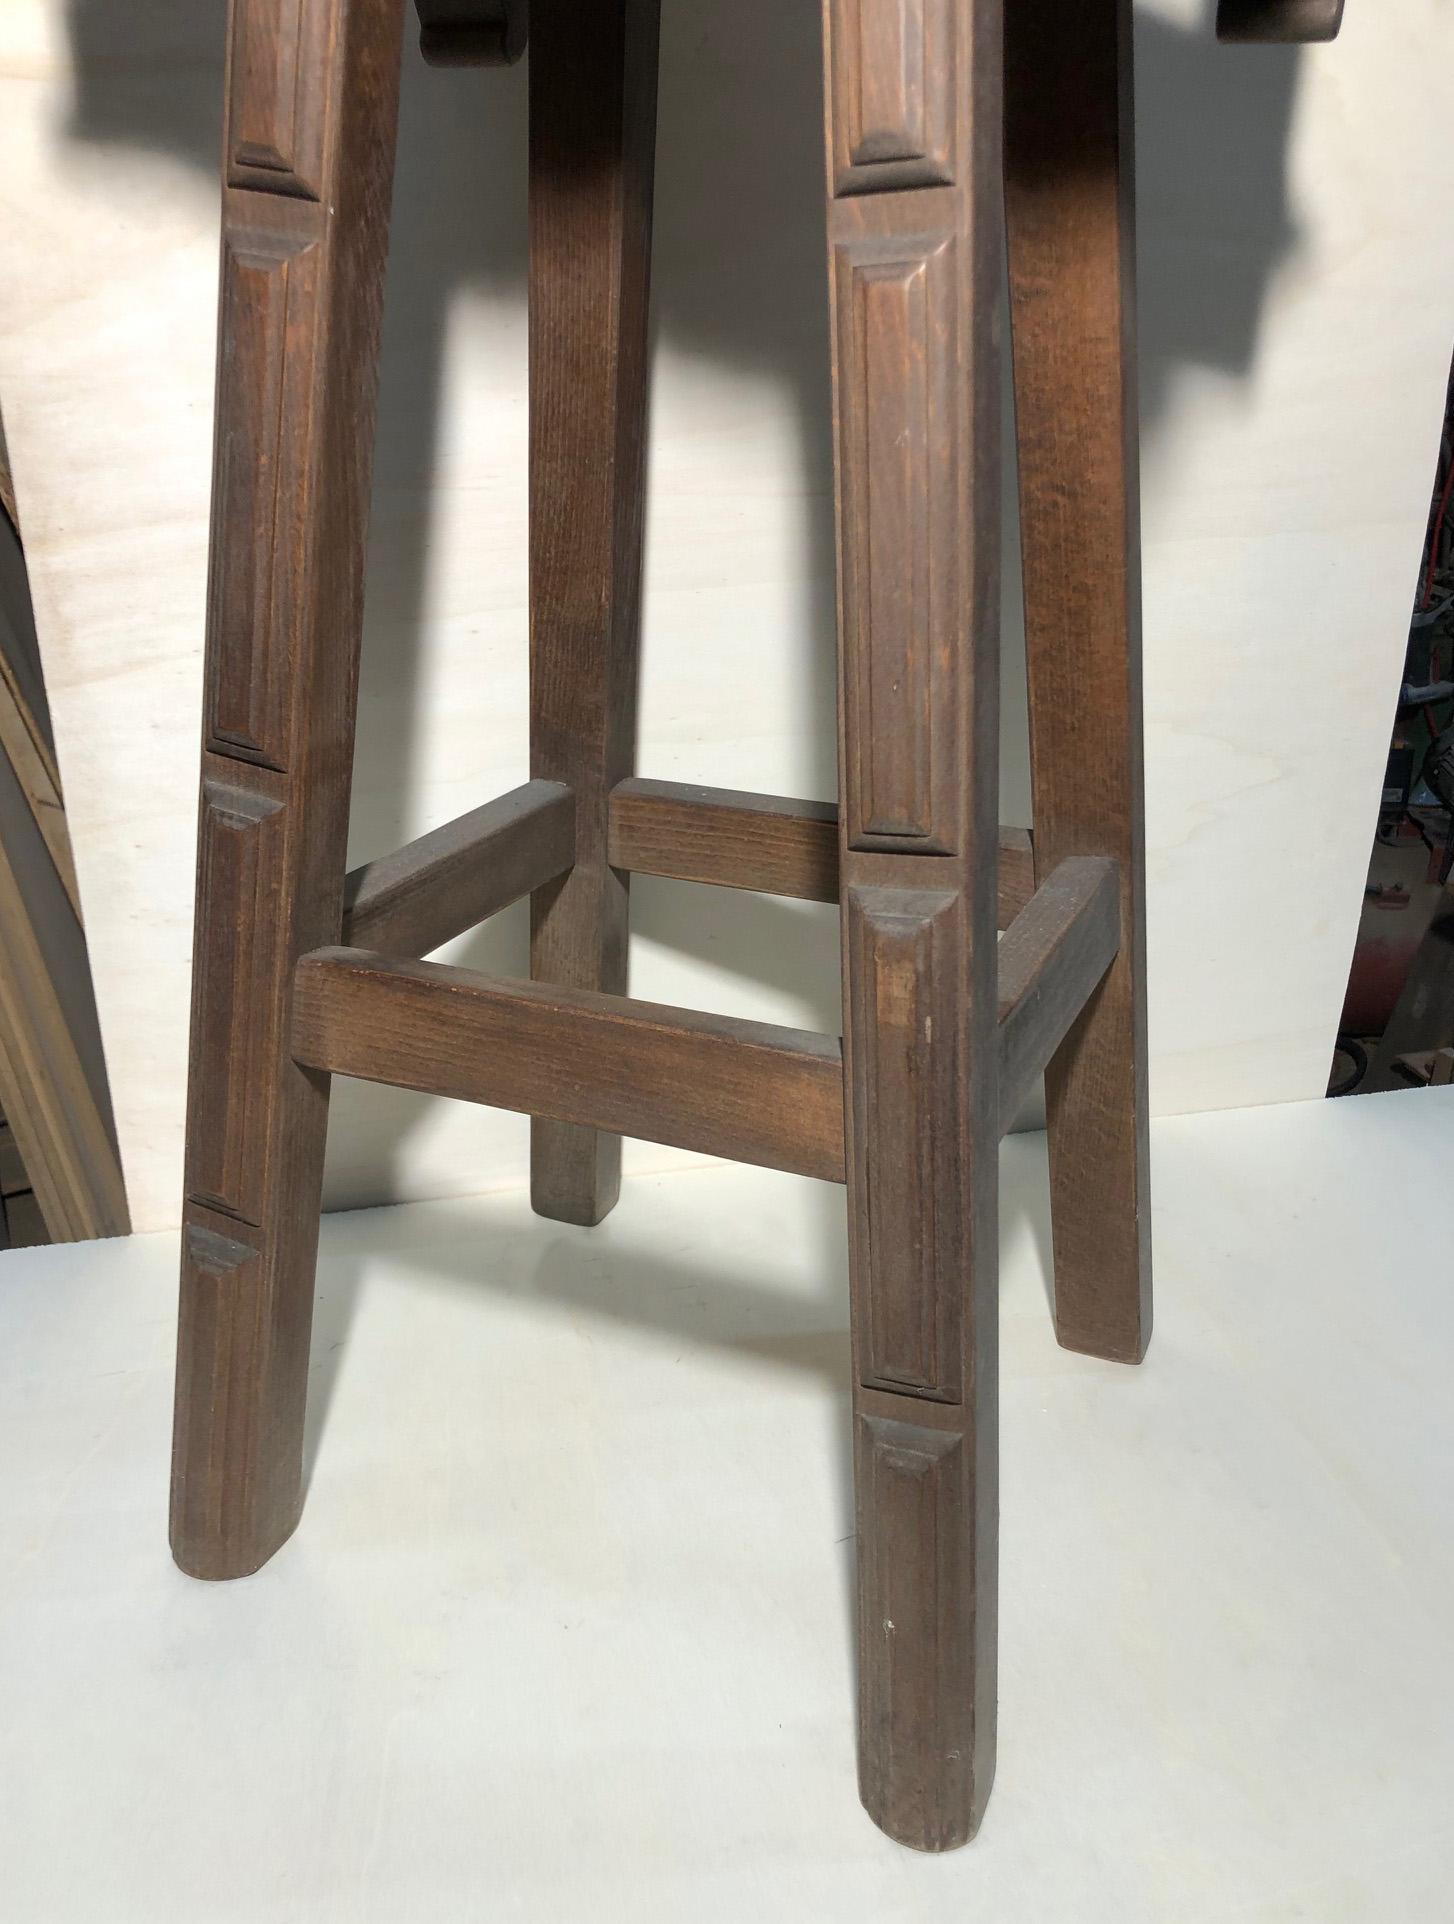 Pair of Italian stools, original from the 1960s, built in beech, they are very robust and heavy.
Original burgundy seat.